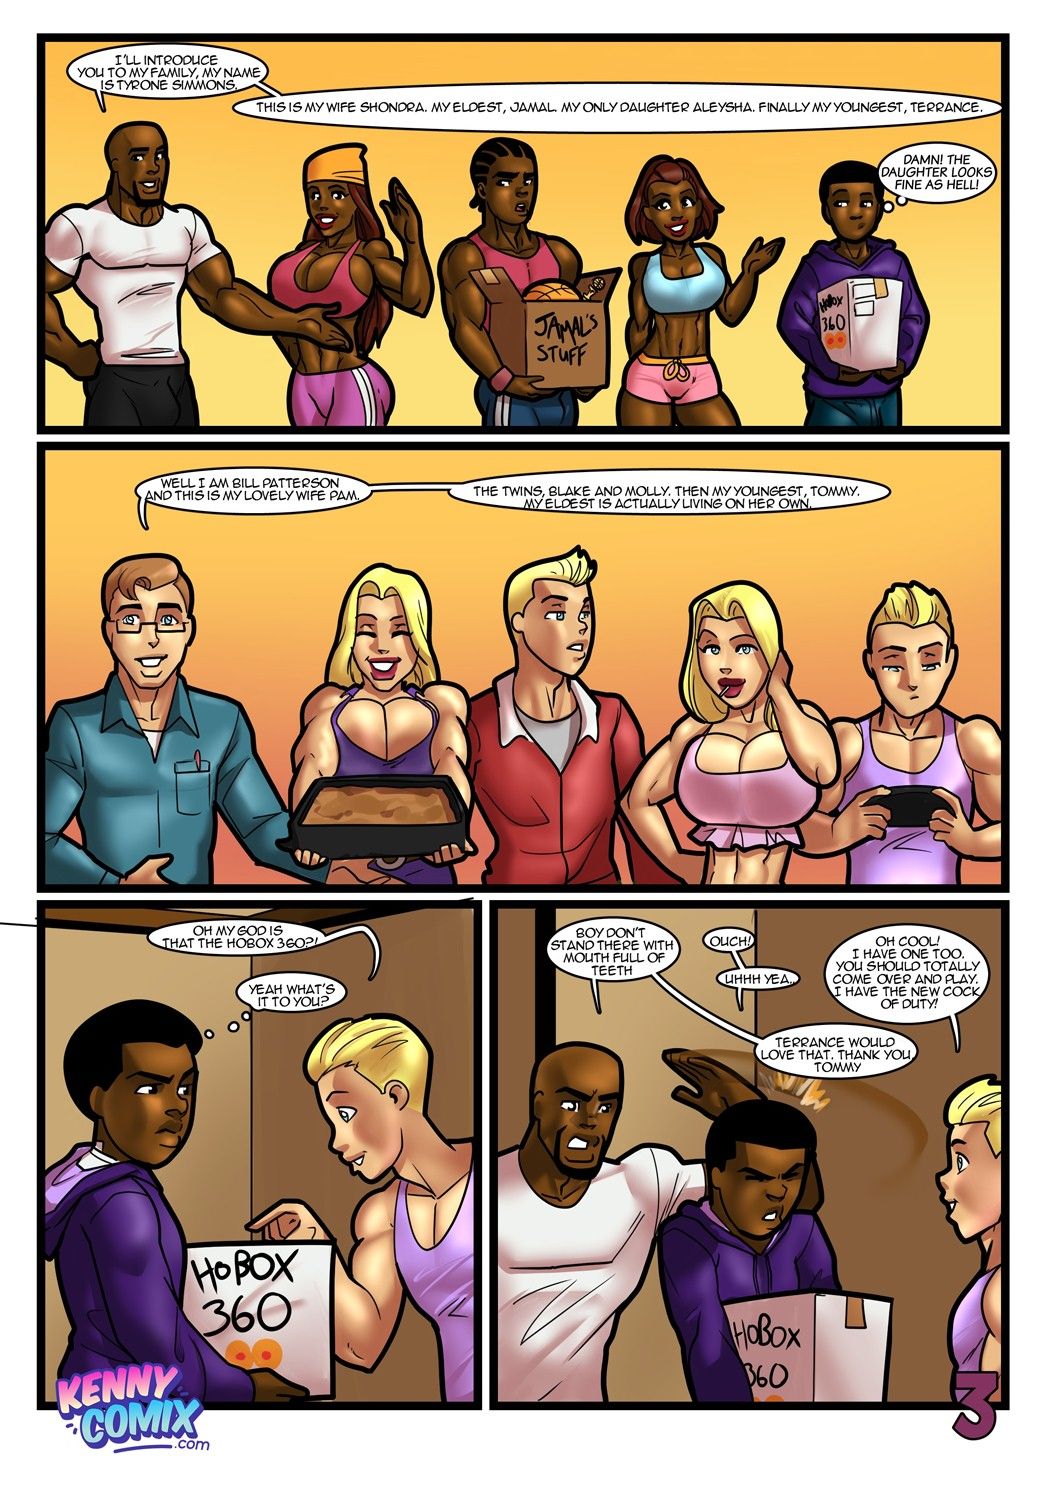 Meet the Neighbors Moving In (Kennycomix) page 4